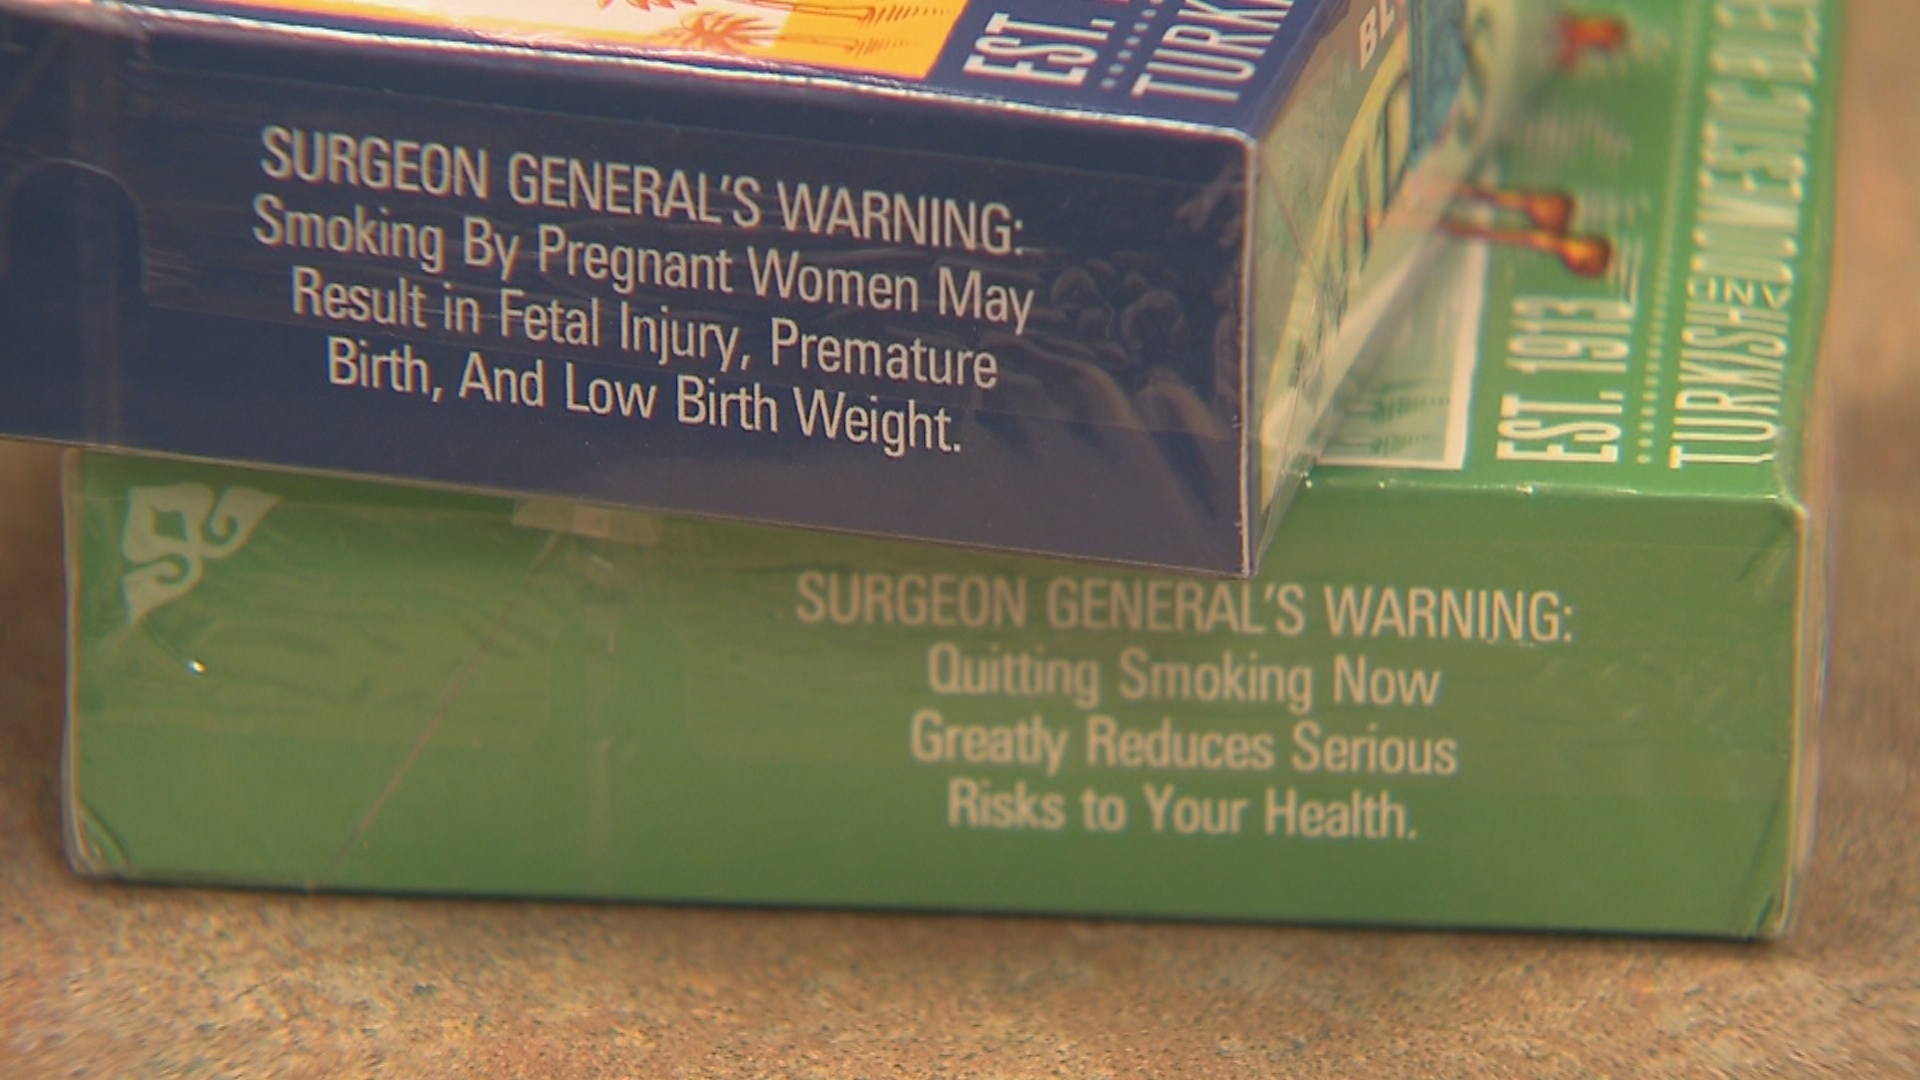 Physician: Ban of menthol cigarettes would have major impact in Indiana